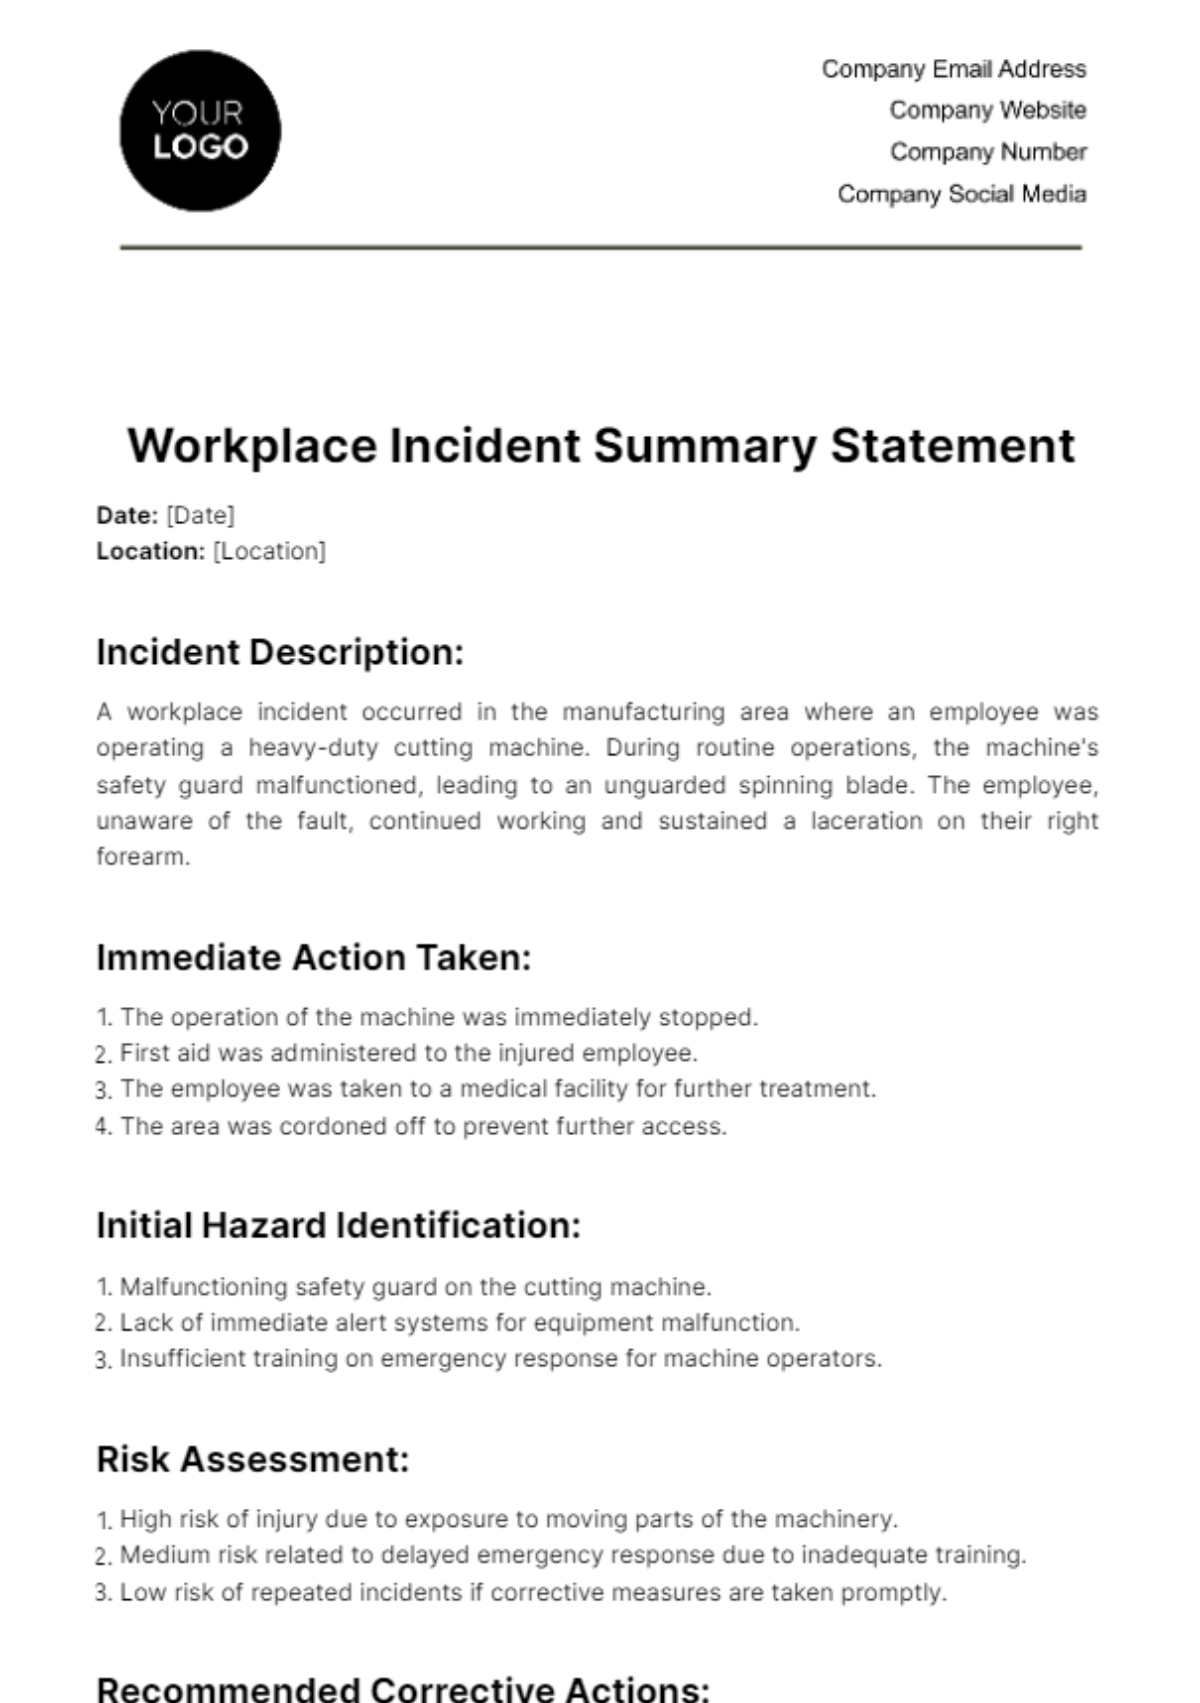 Workplace Incident Summary Statement Template